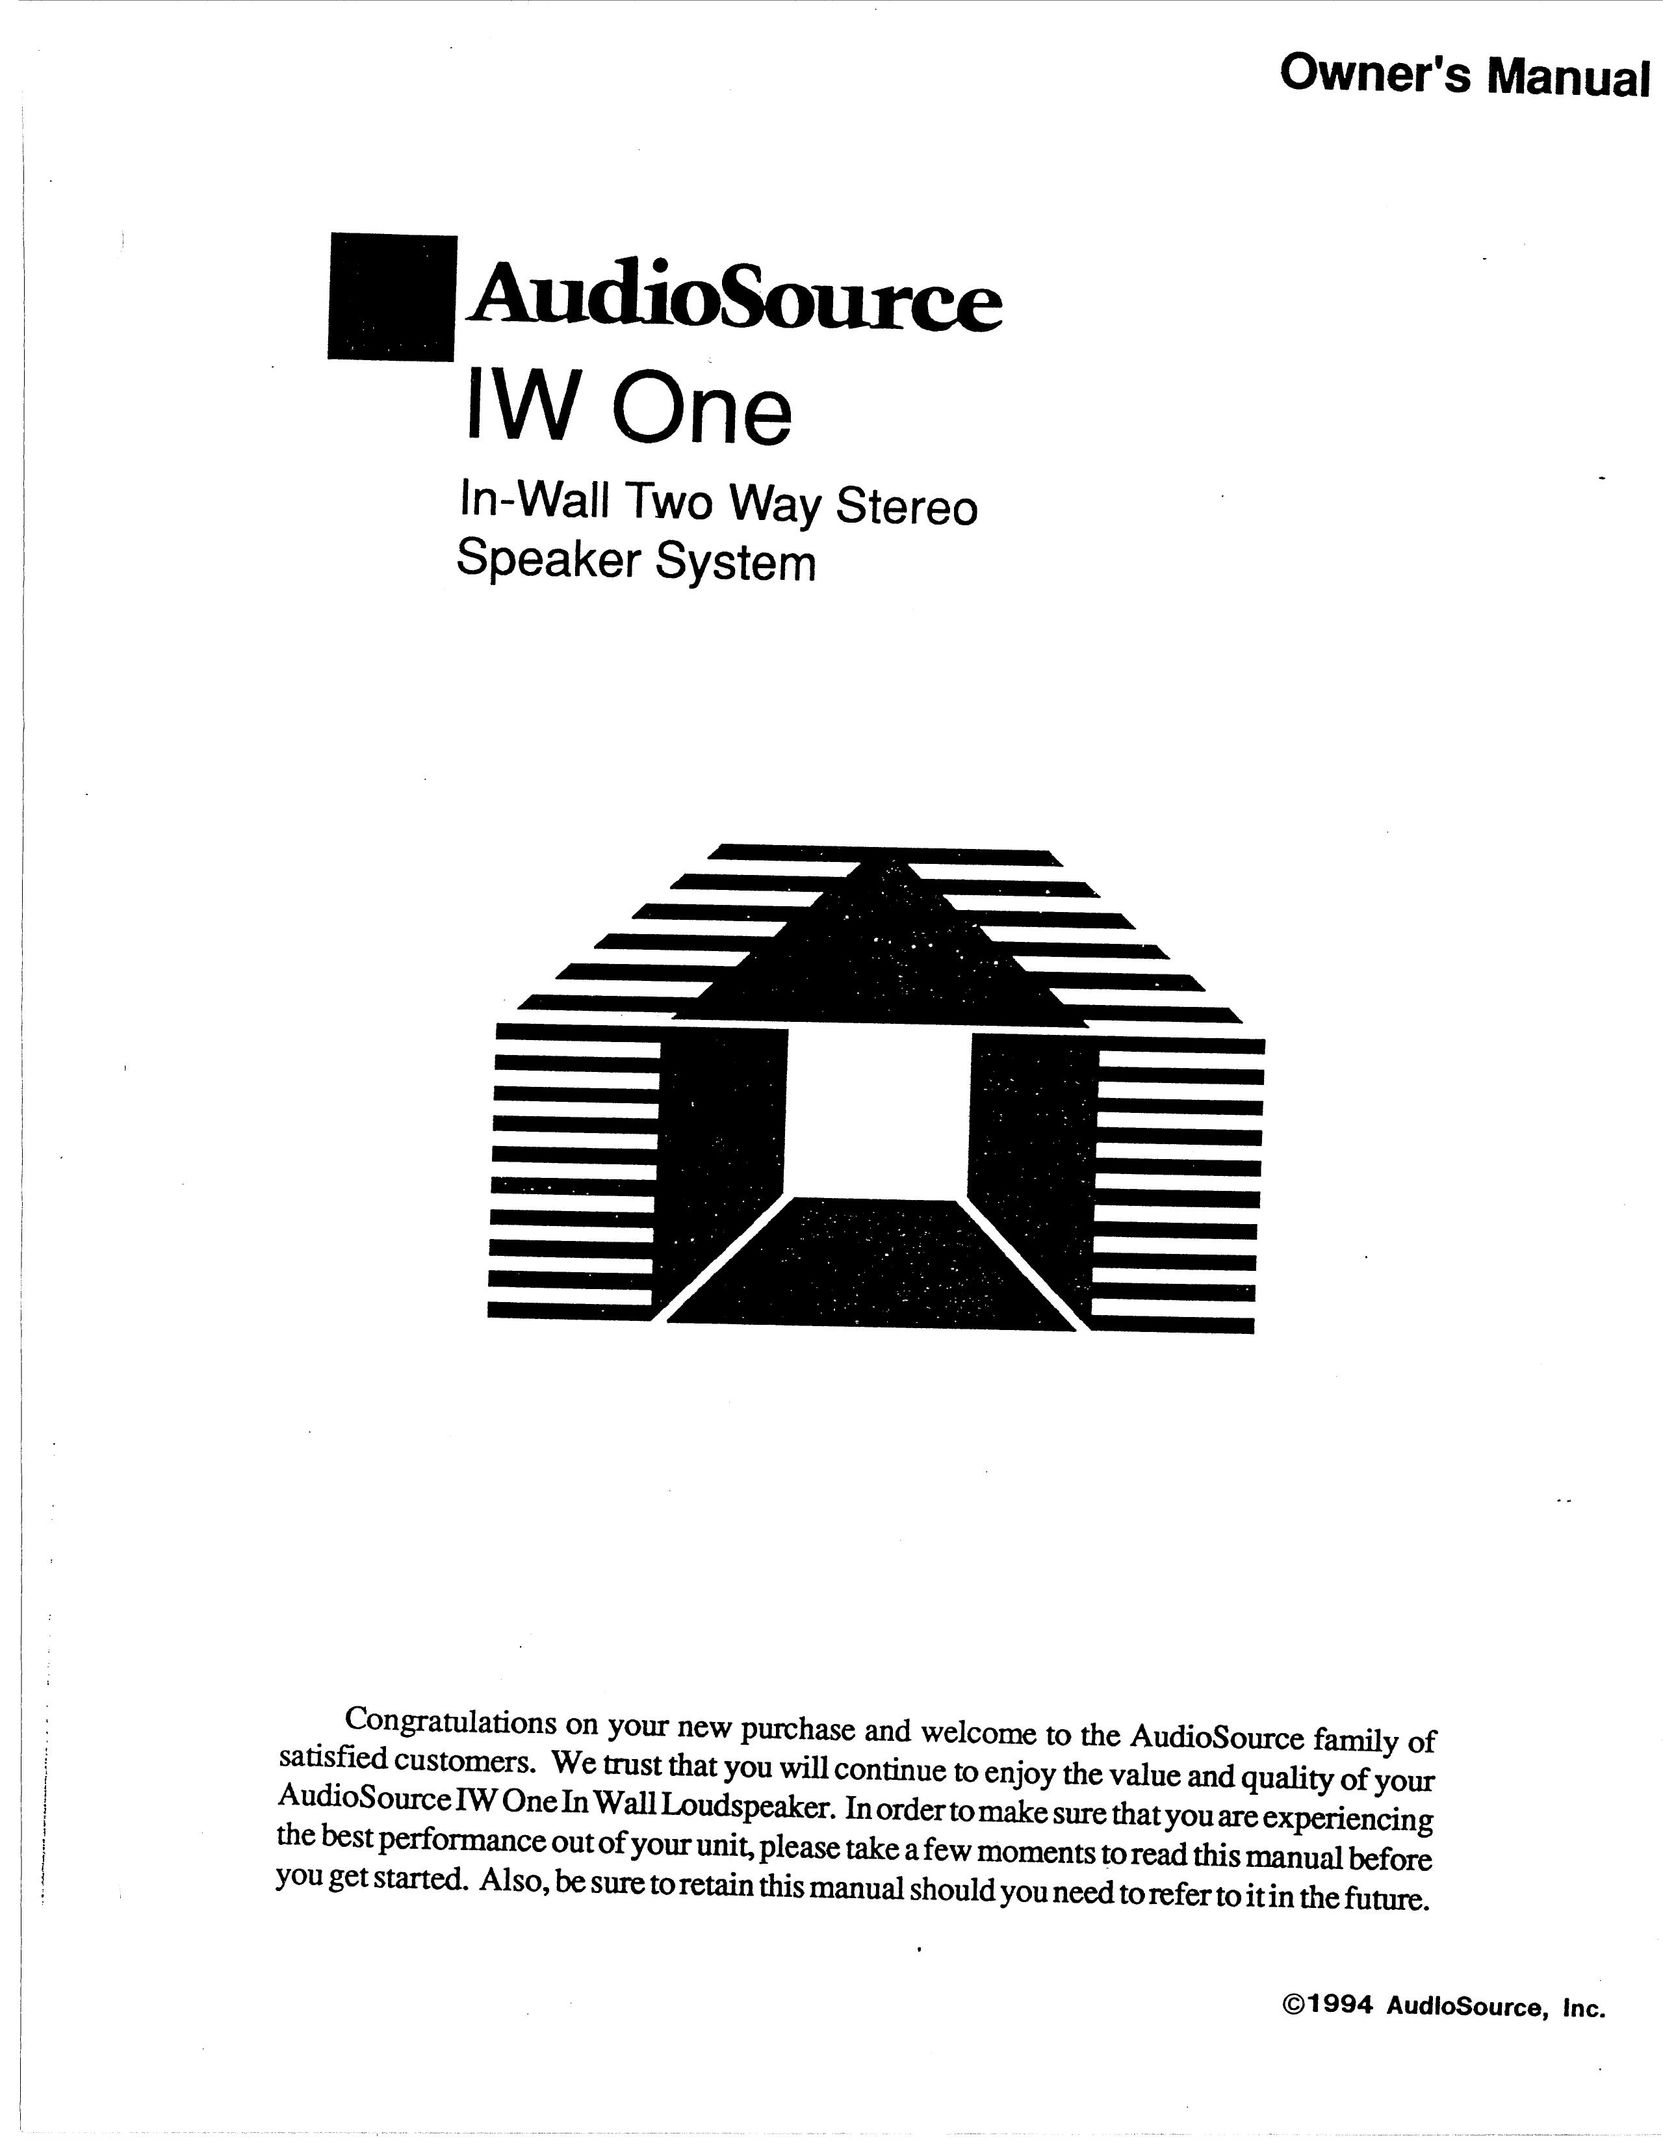 AudioSource AudioSource In-Wall Two Way Stereo Speaker System Speaker System User Manual